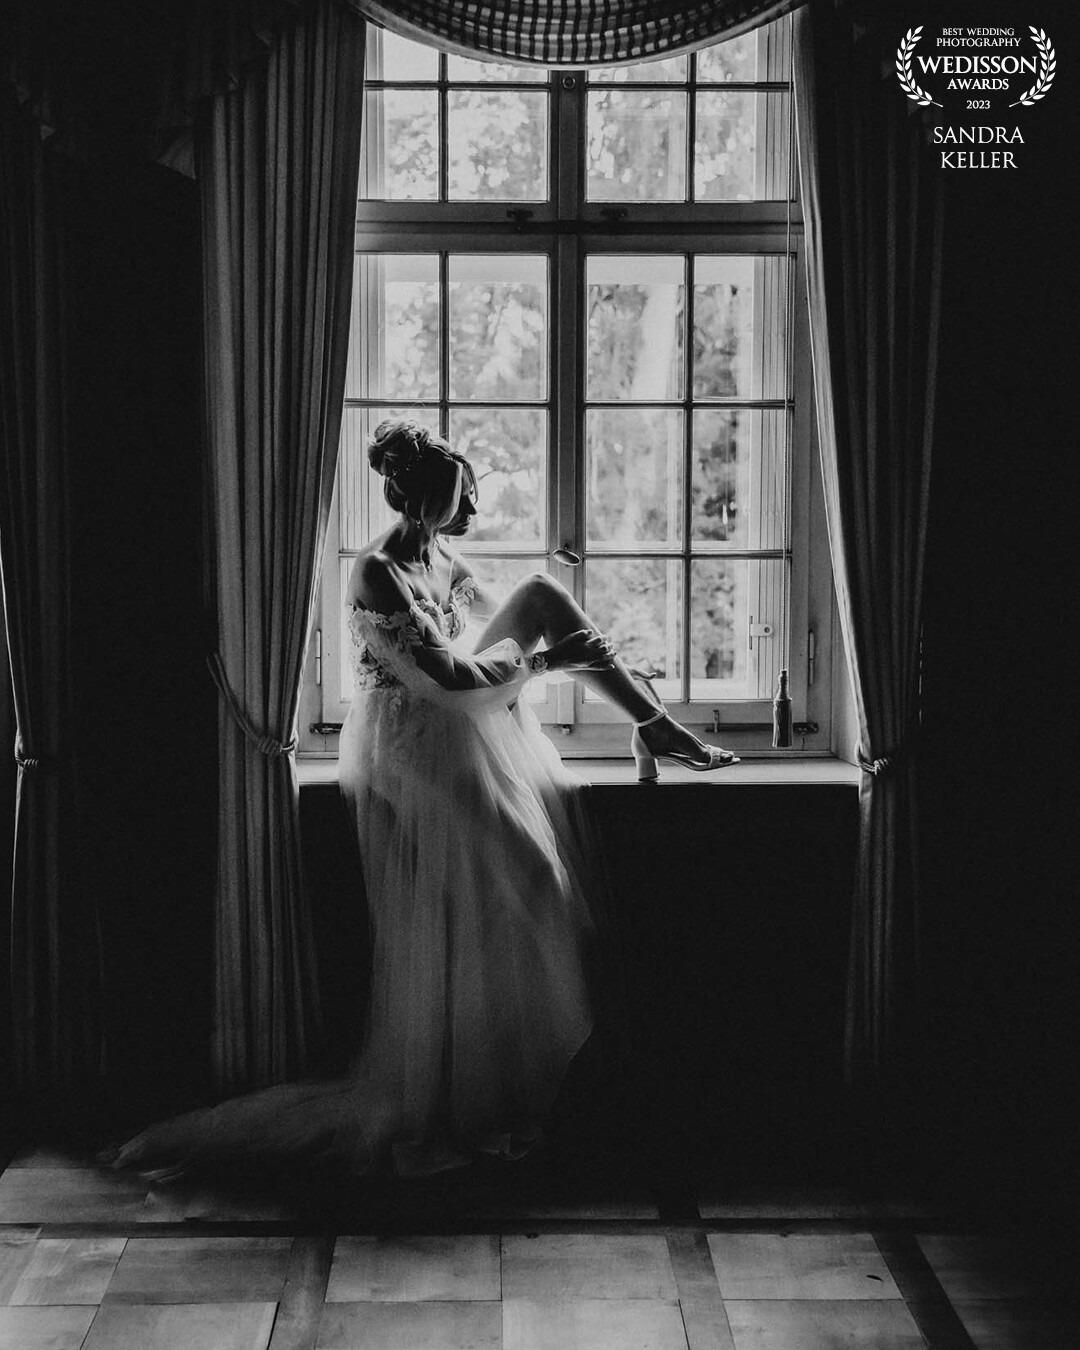 I saw this beautiful window light and had to sit her there to put her shoes on. For me it looks really peaceful and elegant.